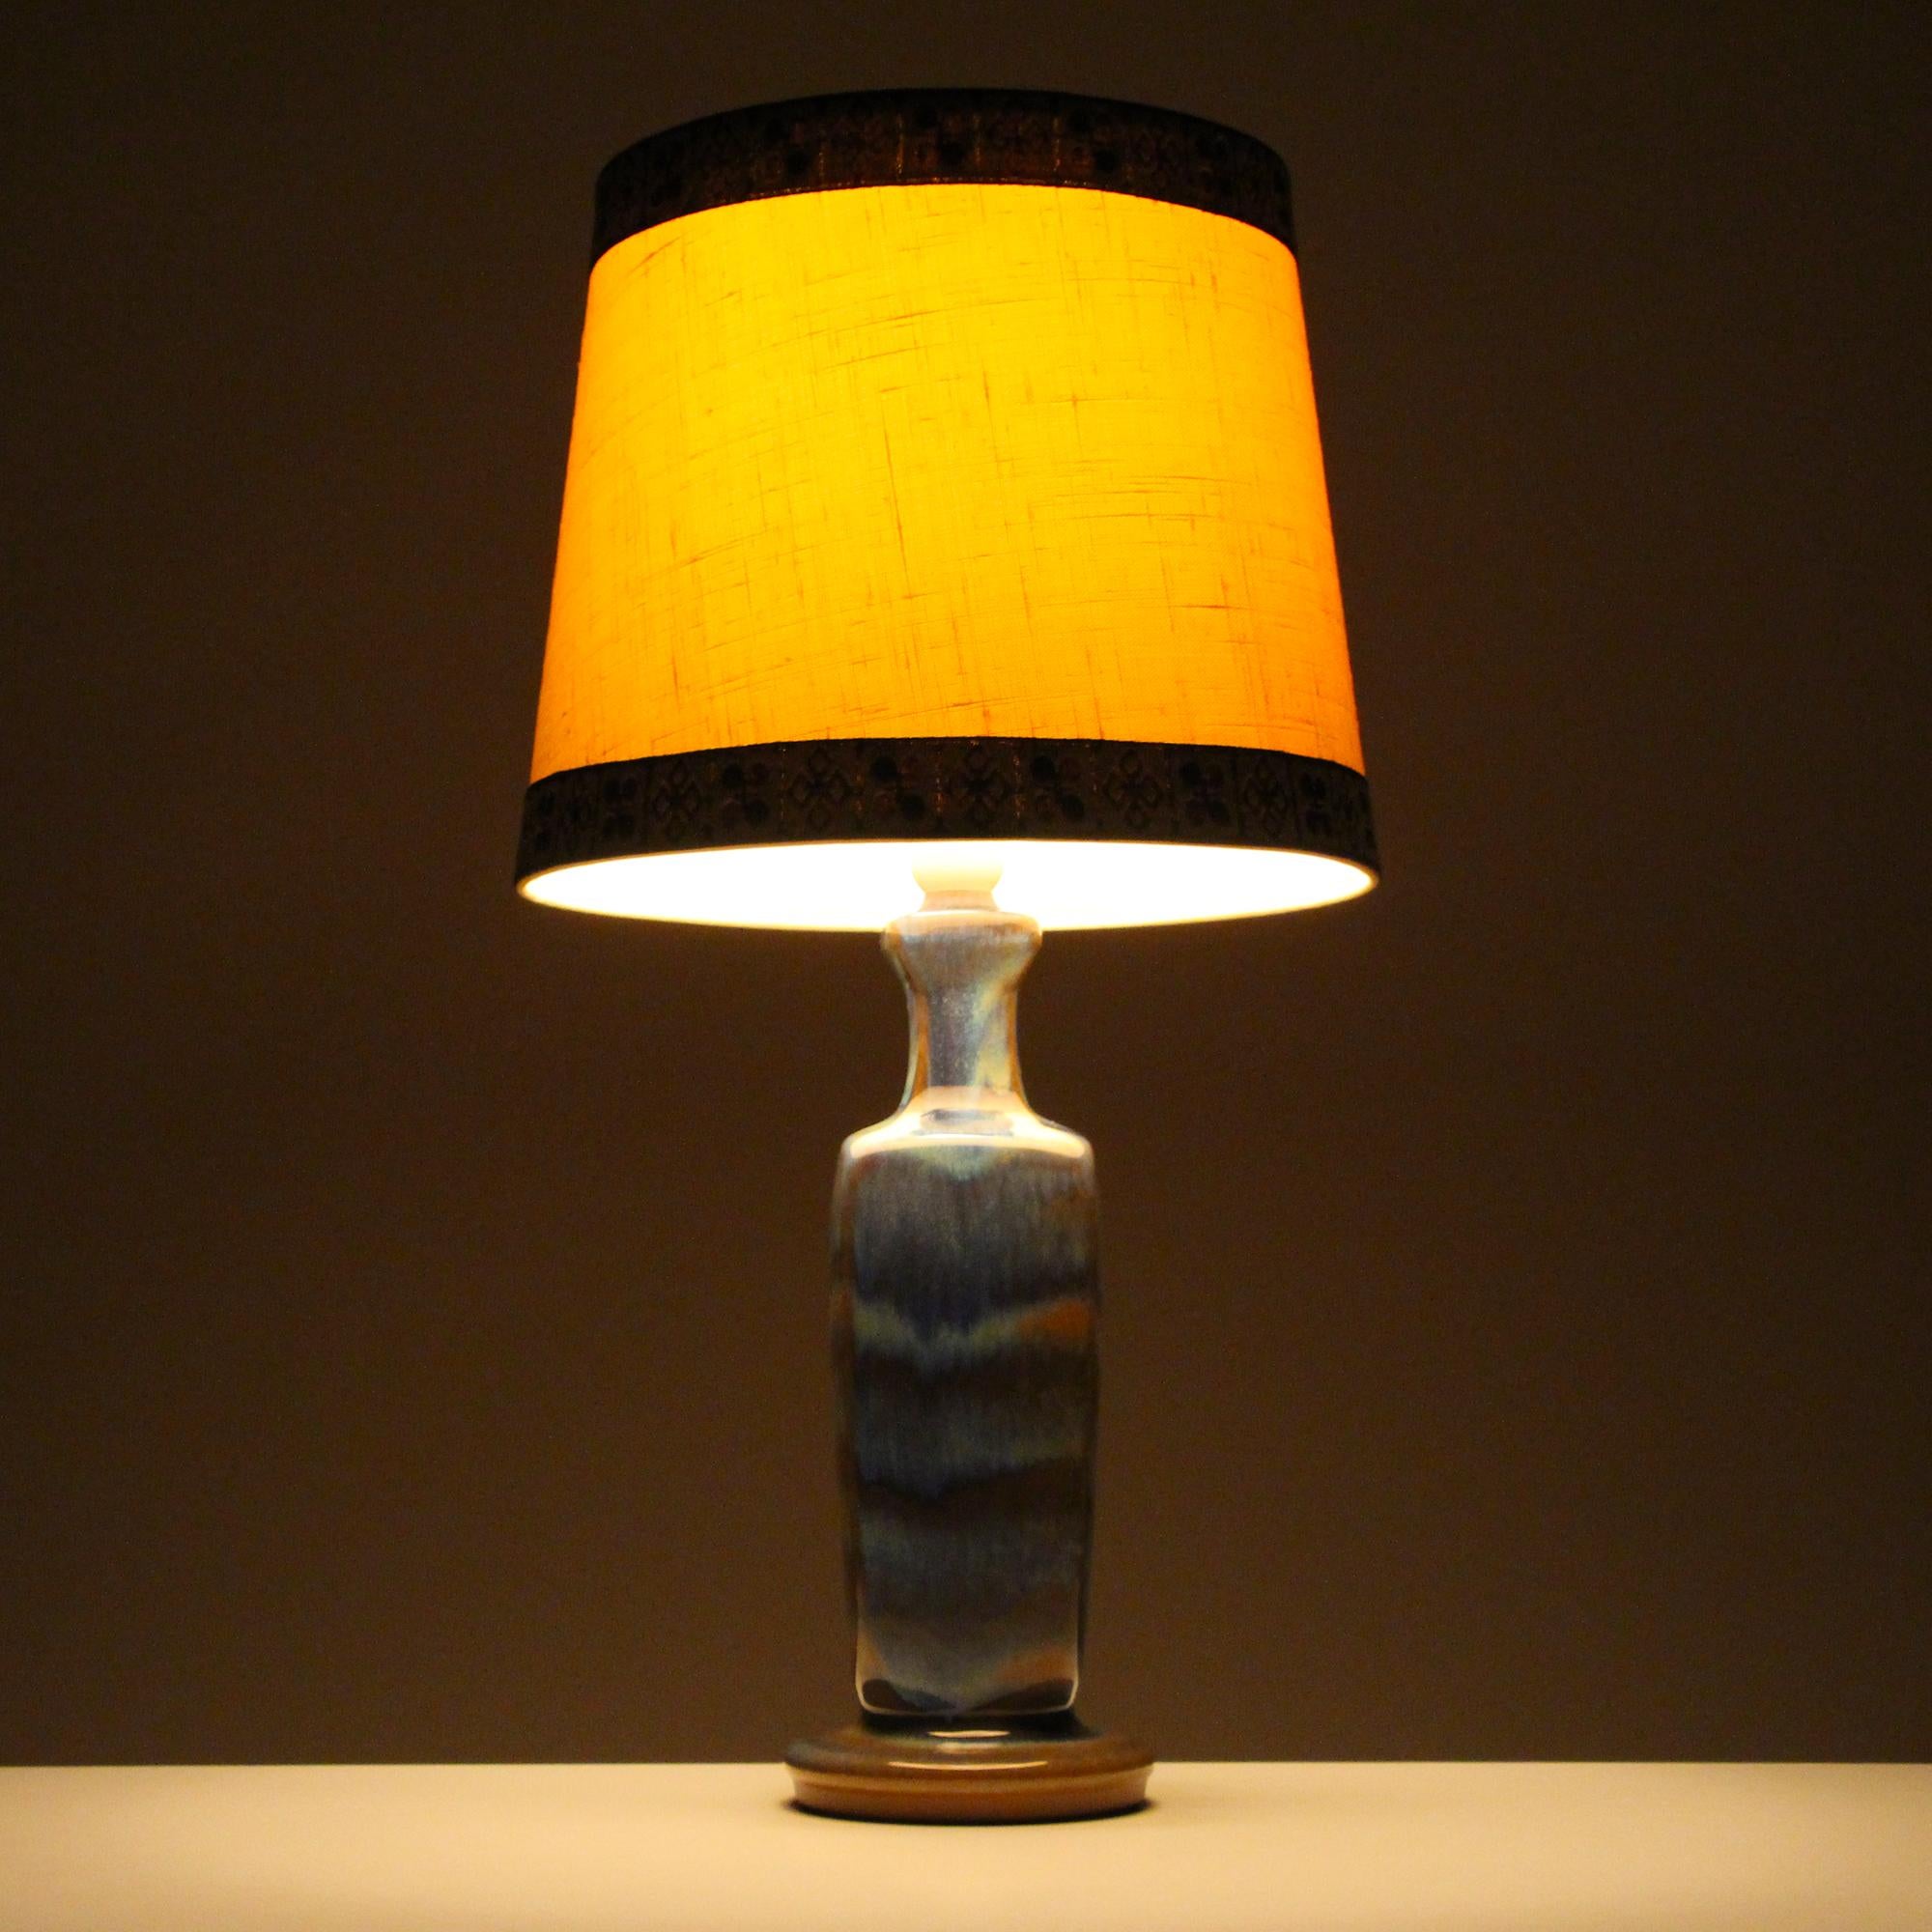 Danish Blue Table Lamp by Michael Andersen & Son 1960s, with Vintage Shade Included